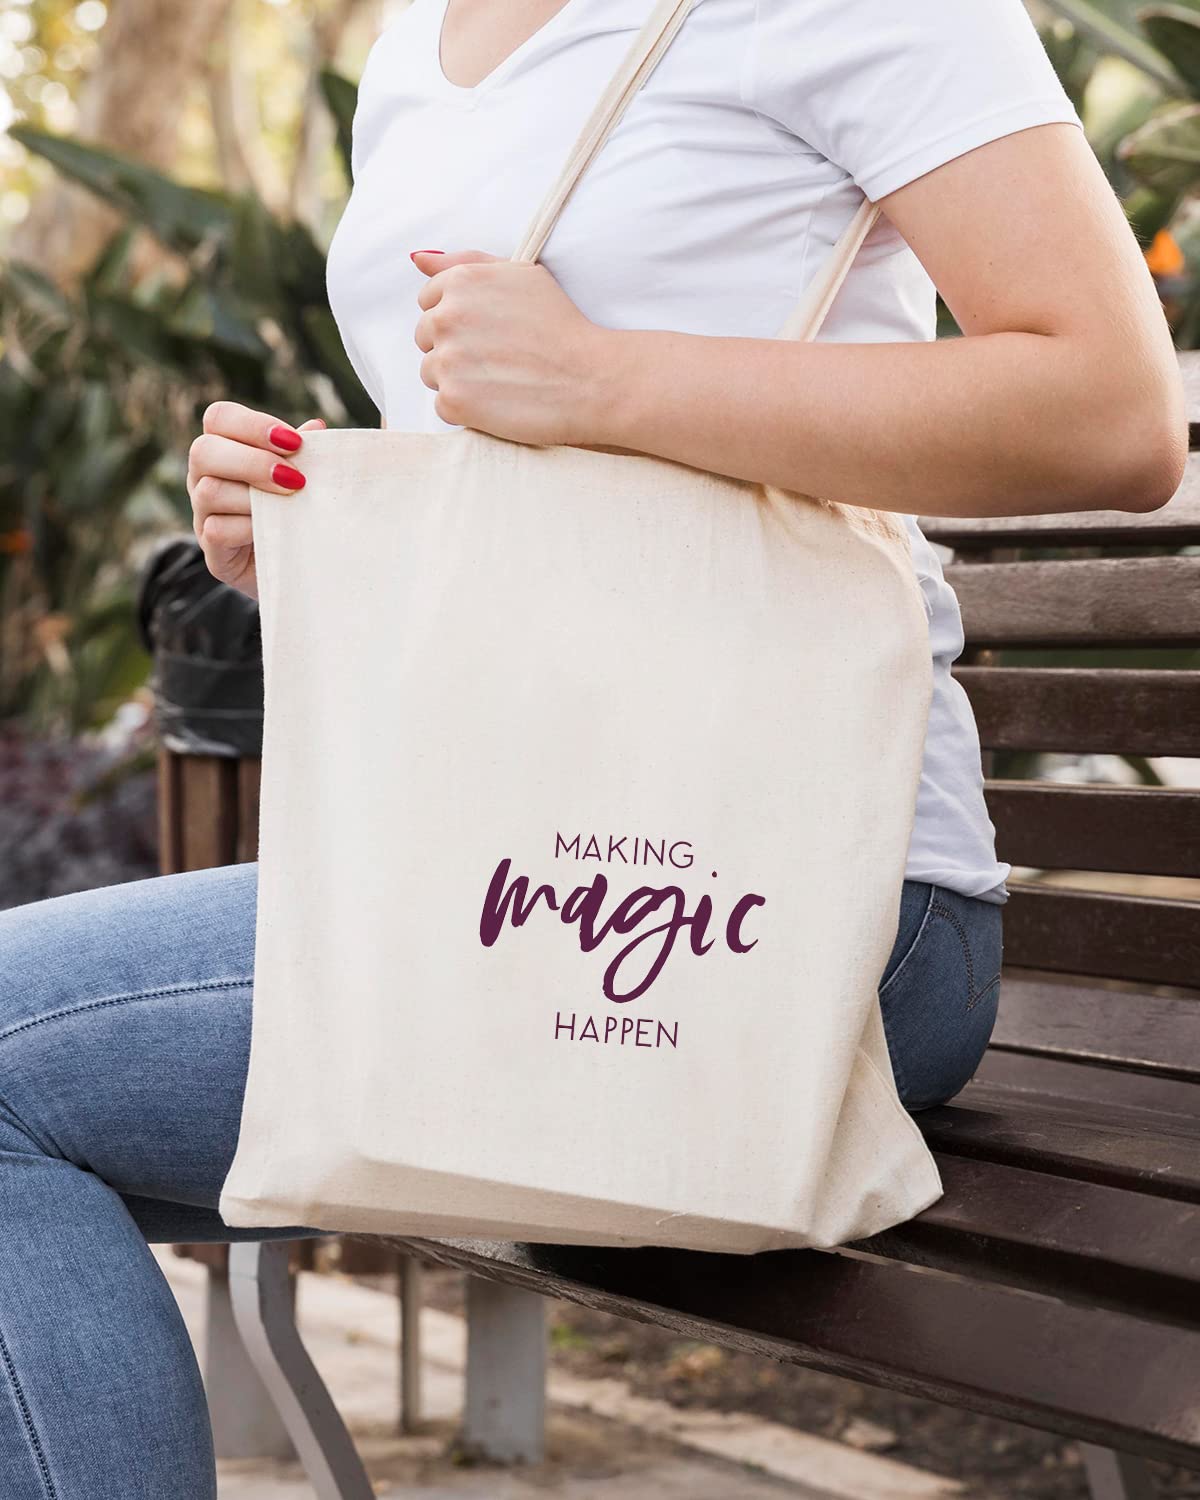 The Pink Magnet Making Magic Happen Tote Bag - Canvas Tote Bag for Women | Printed Multipurpose Cotton Bags | Cute Hand Bag for Girls | Best for College, Travel, Grocery | Reusable Shopping Bag | Eco-Friendly Tote Bag